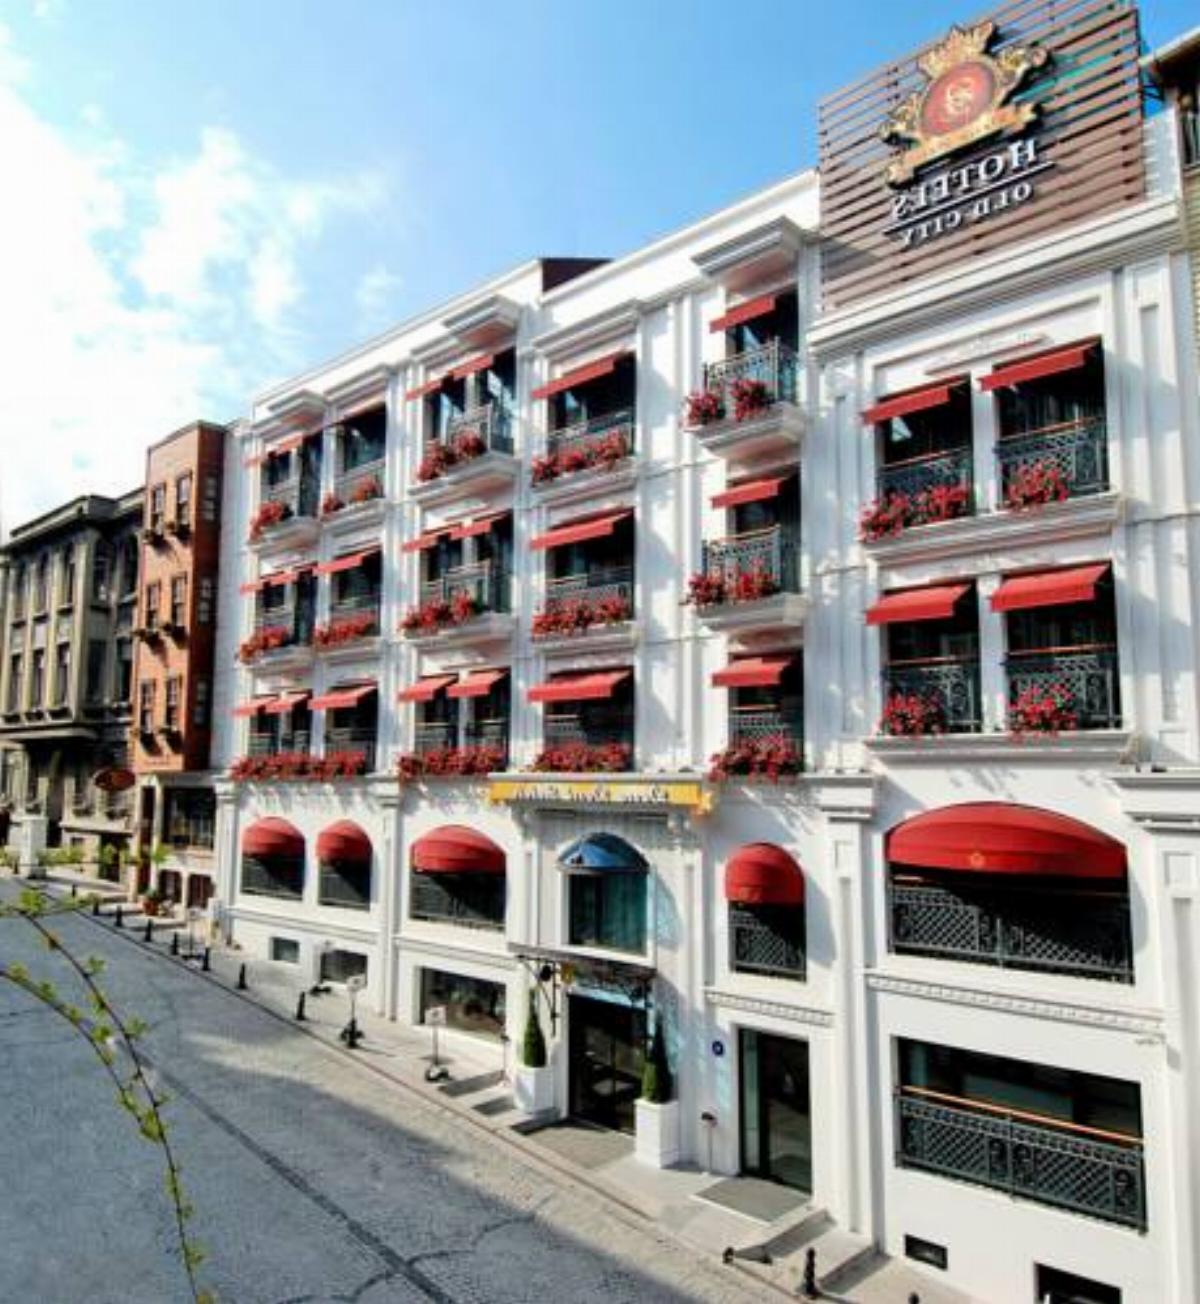 Dosso Dossi Hotels Old City Hotel İstanbul Turkey